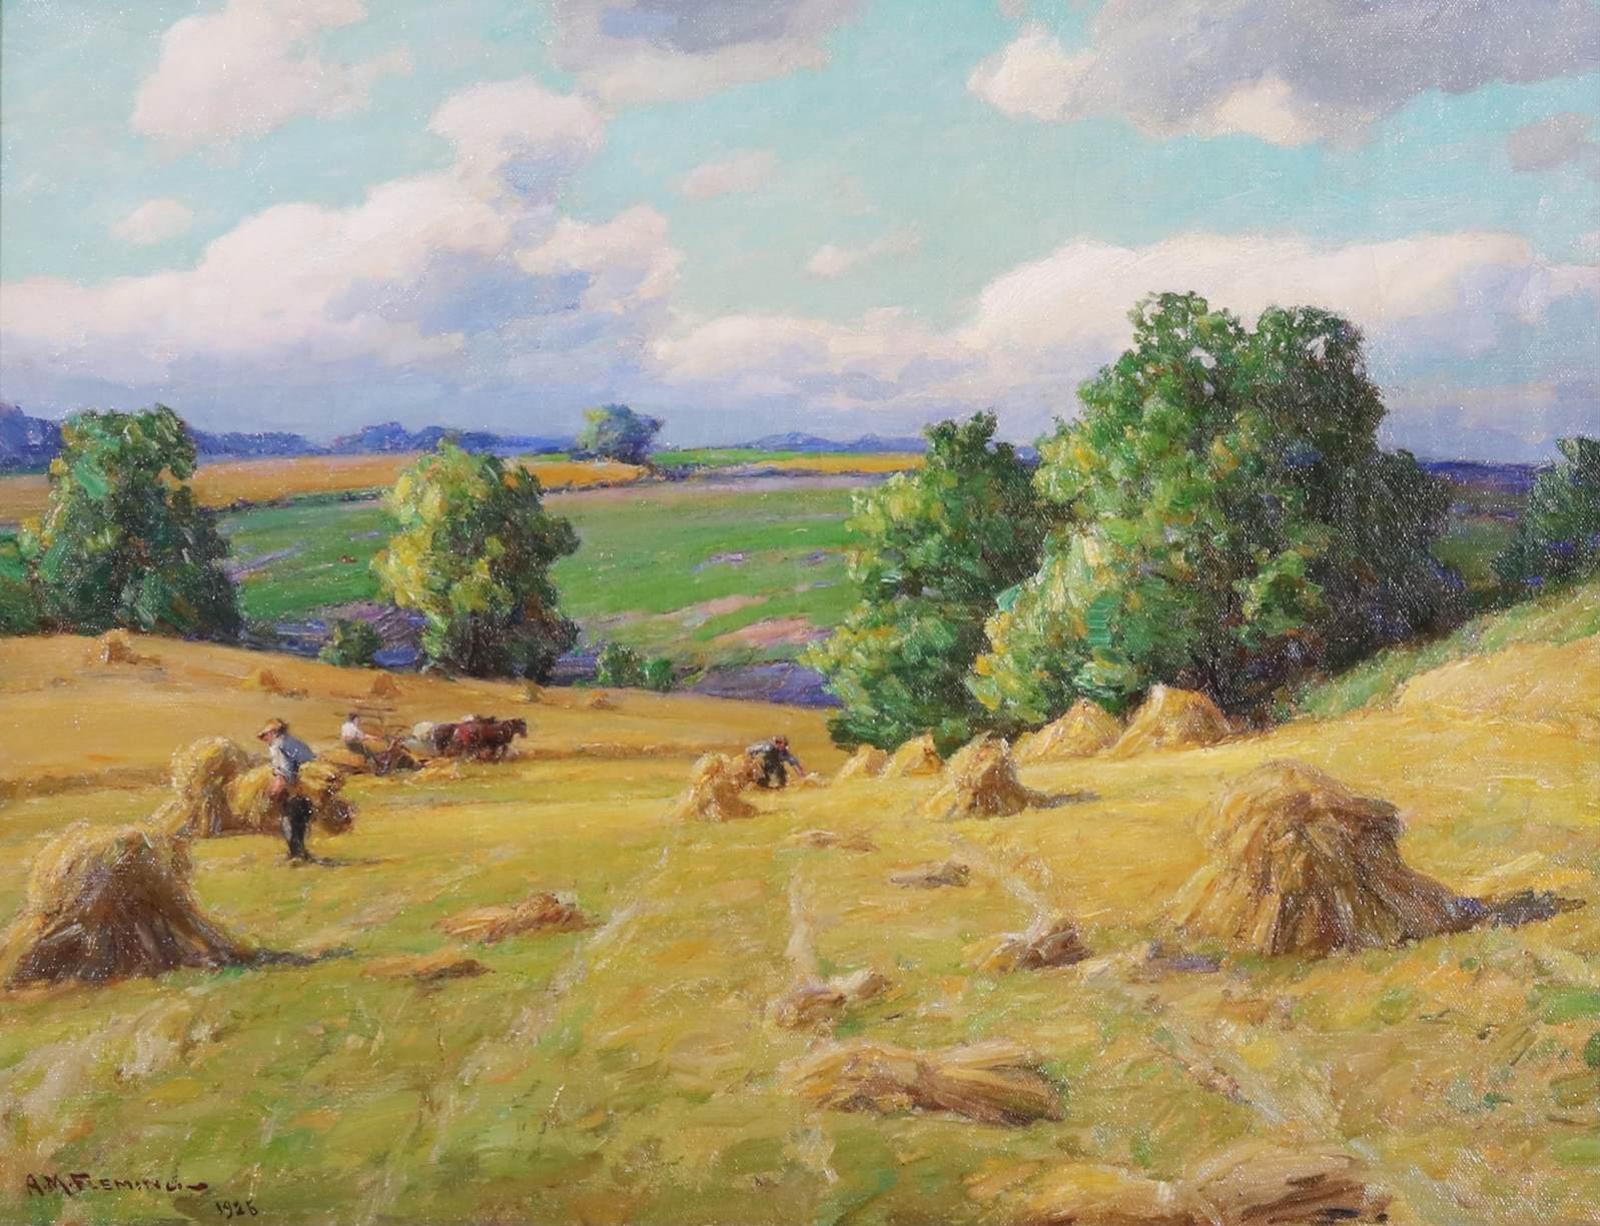 Alexander M. Fleming (1878-1929) - A Sunny Day In Harvest Time (Near Belfountain, Peel County, Ontario); 1925